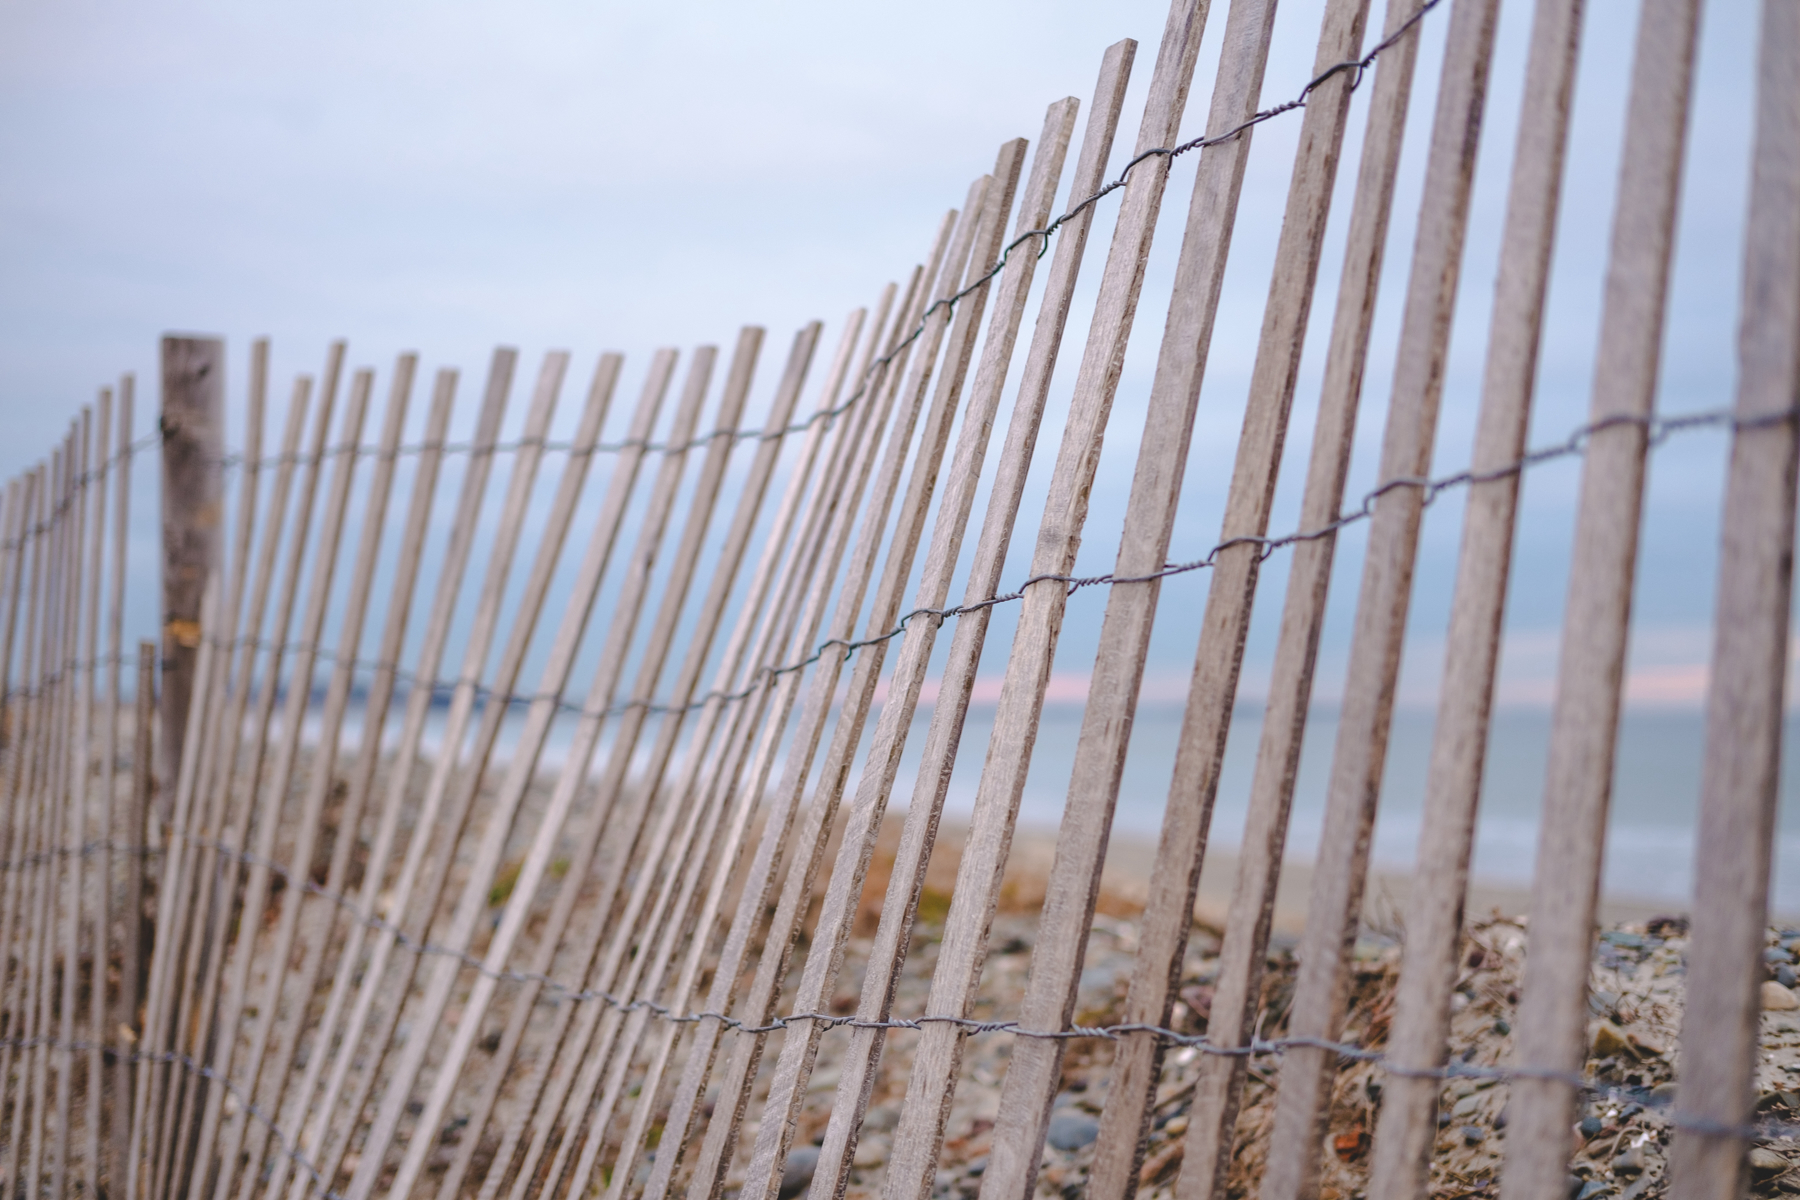 A wooden slat fence along a beach with blurry ocean and pale sunrise sky in the background.